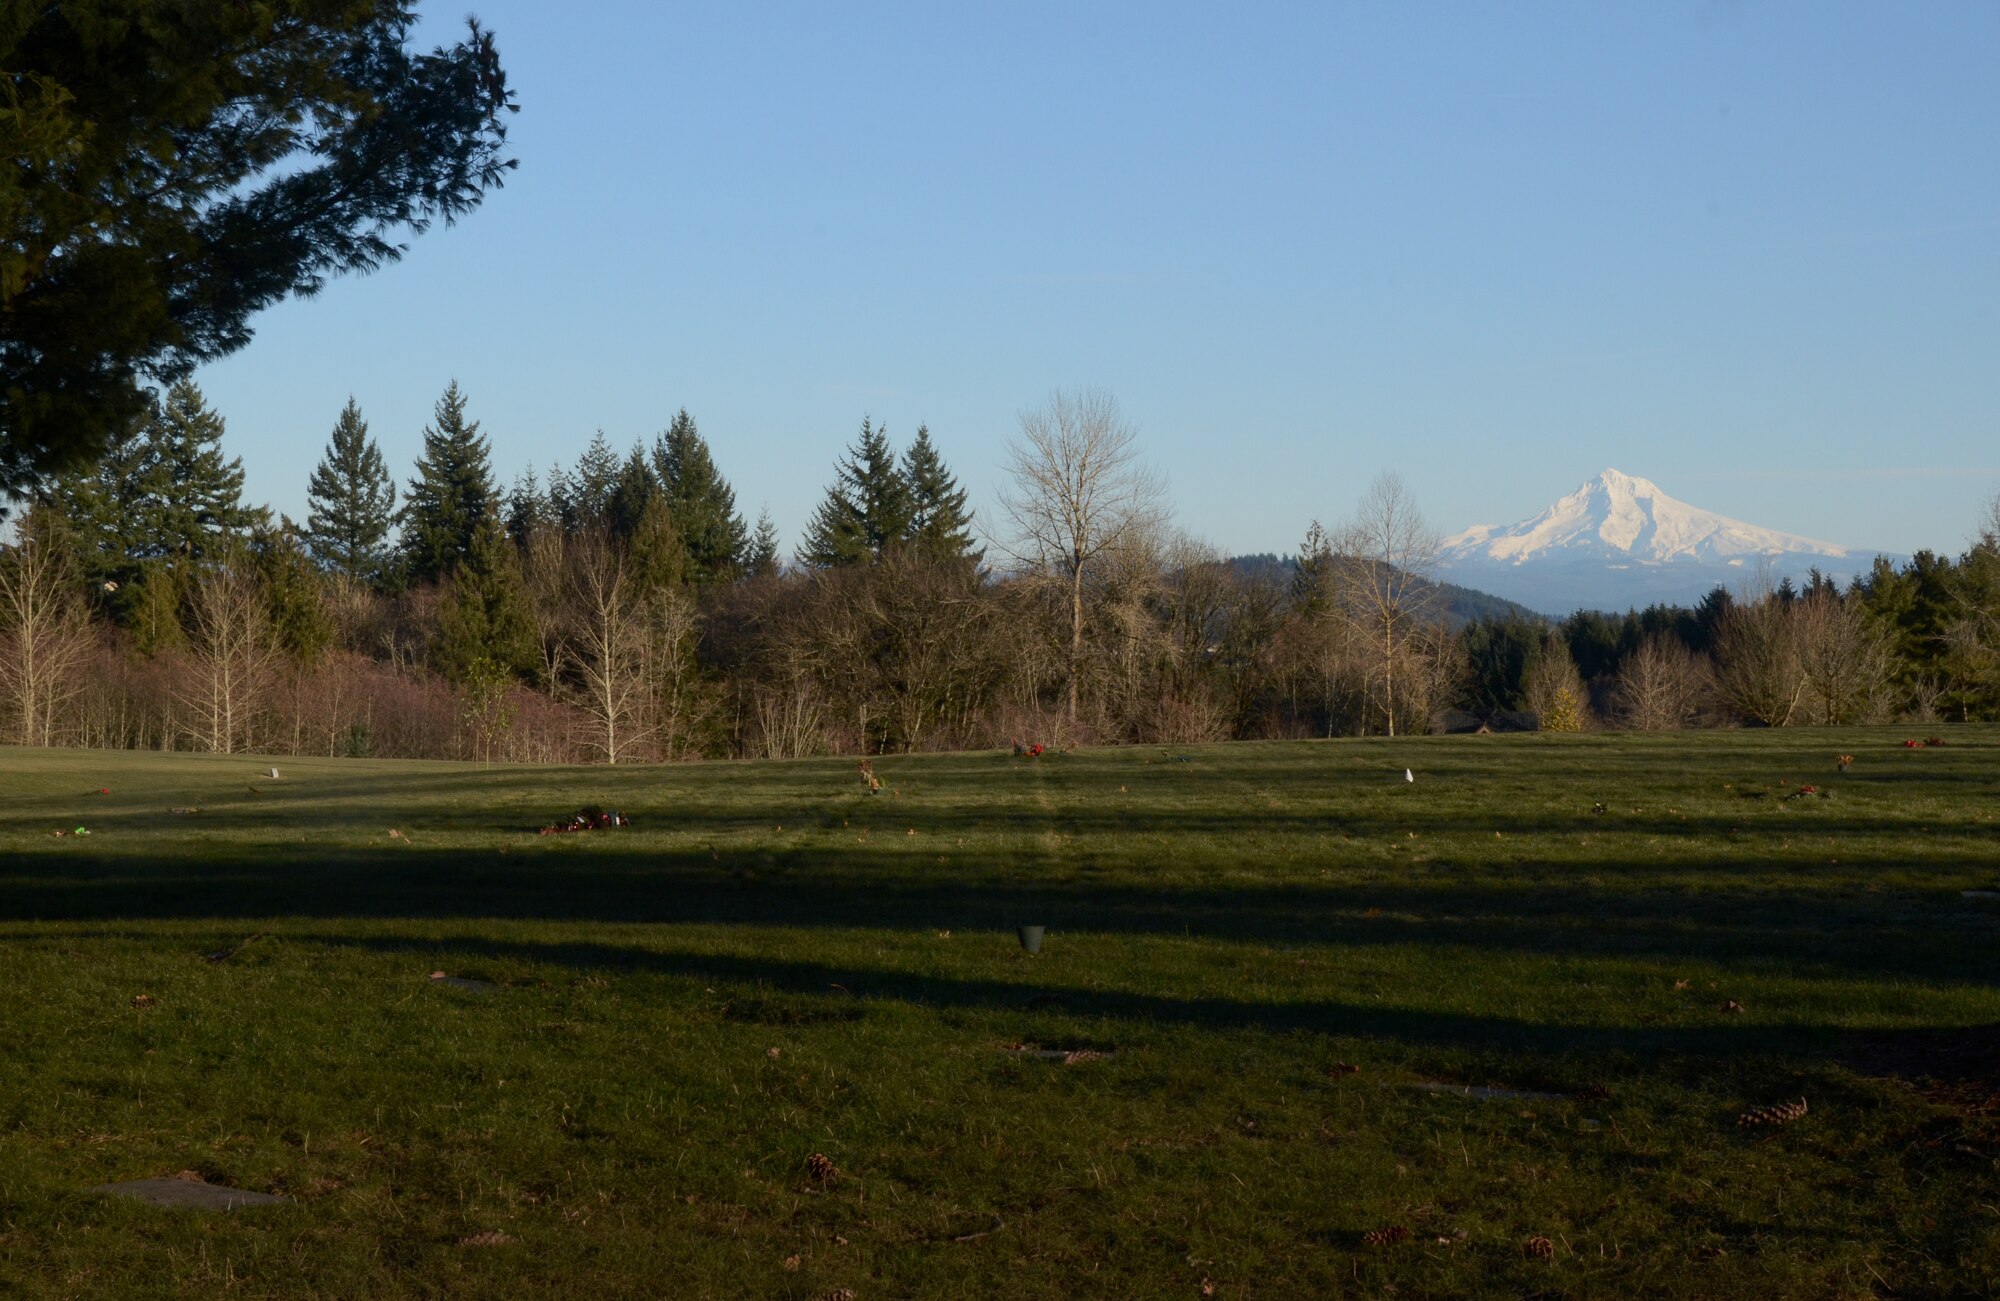 Overlooking Willamette National Cemetery, Portland, Ore., with Mt. Hood to the east, Jan. 6, 2017. The 307-acre cemetery located about 10 miles southeast of the city of Portland, Ore., straddles the county line between Multnomah and Clackamas Counties and is administered by the United States Department of Veterans Affairs. (U.S. Air National Guard photo by Tech. Sgt. John Hughel, 142nd Fighter Wing Public Affairs)